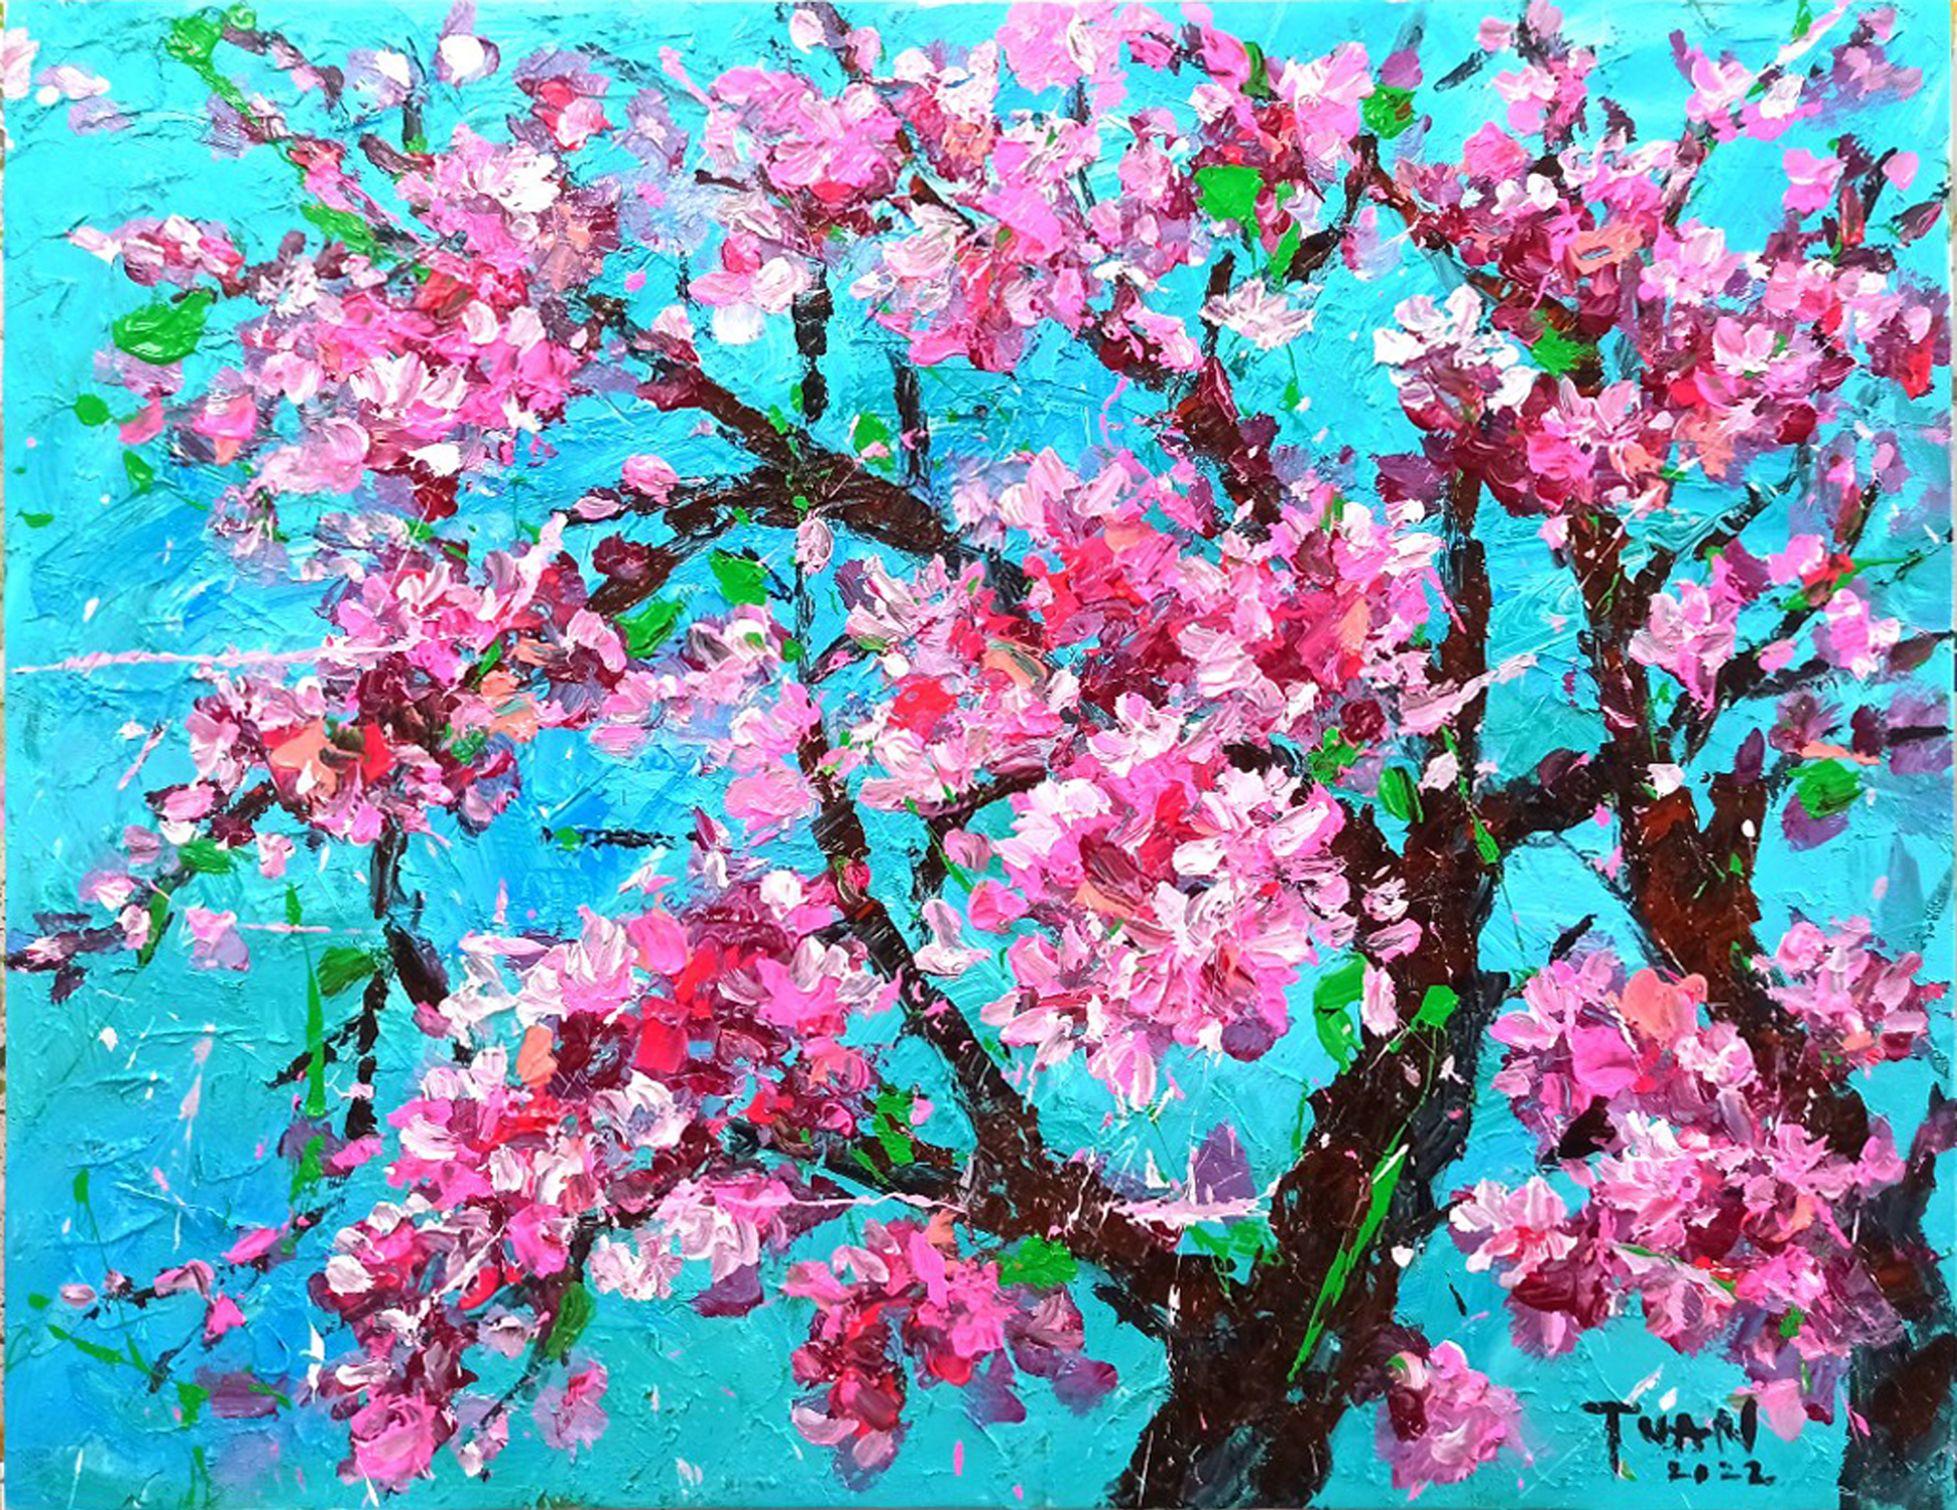 Peach blossom is the most beautiful and popular flower in the North of Vietnam, loved by many people and displayed during Tet.  Peach tree is considered the quintessence of the Five Elements, according to feng shui this tree can cure all demons, so